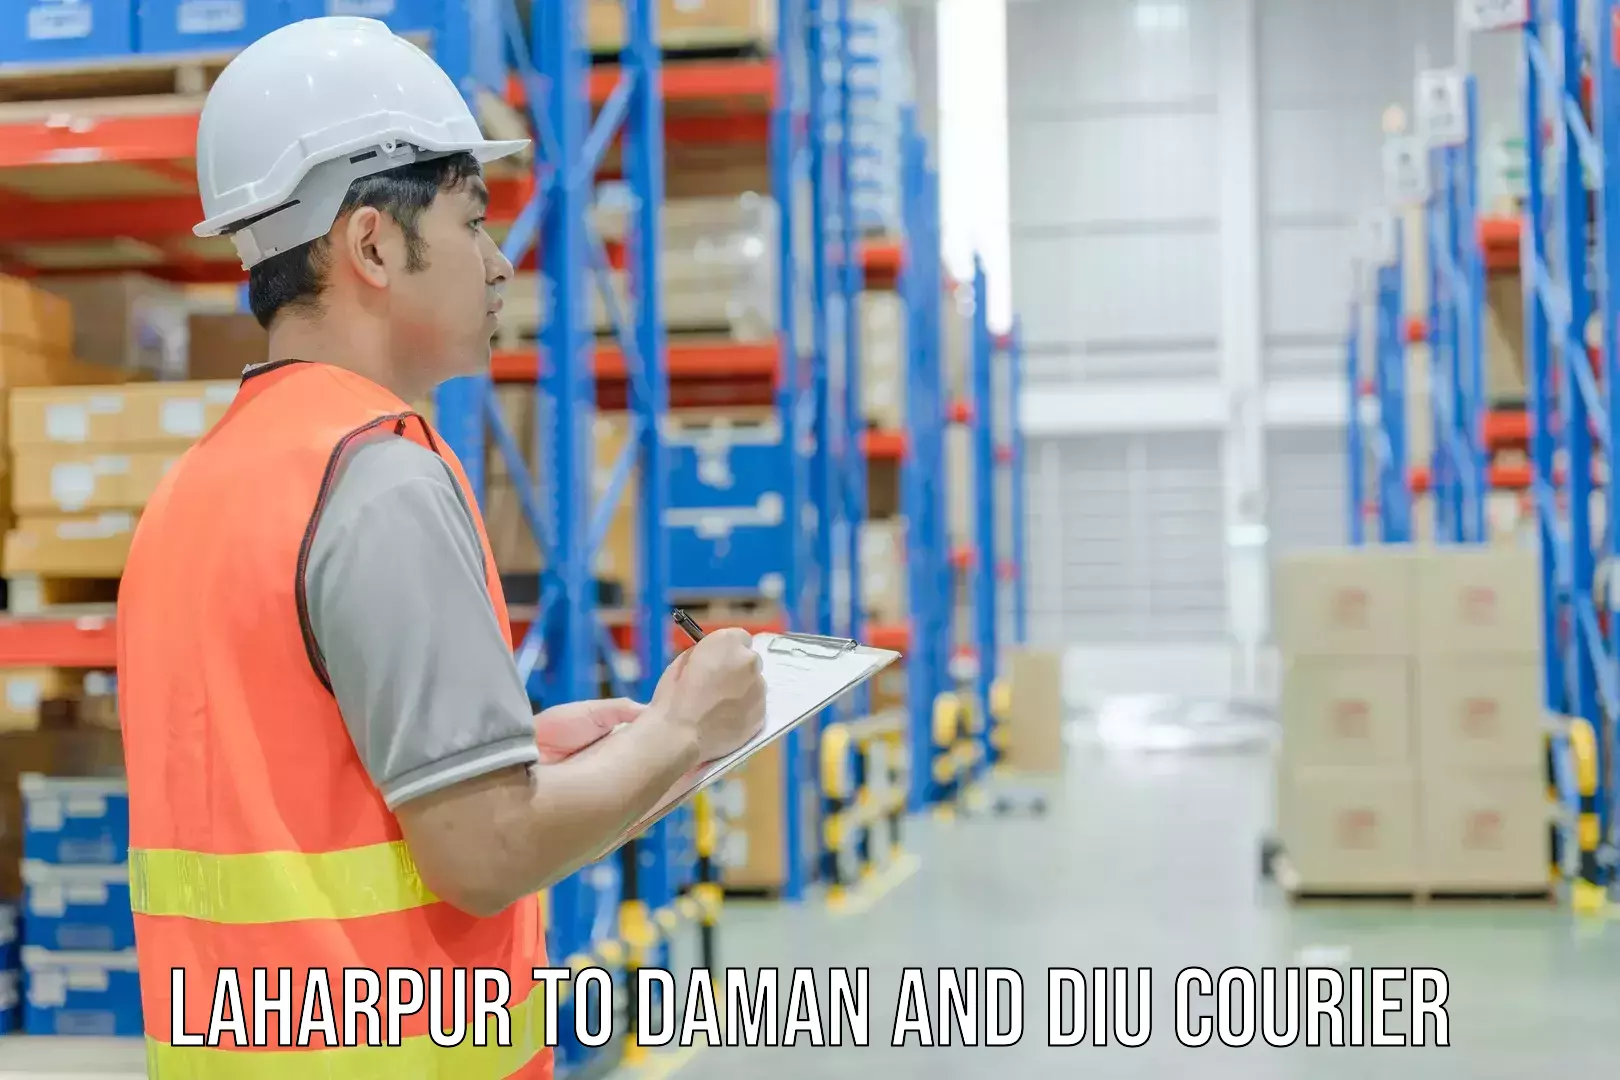 Nationwide courier service Laharpur to Daman